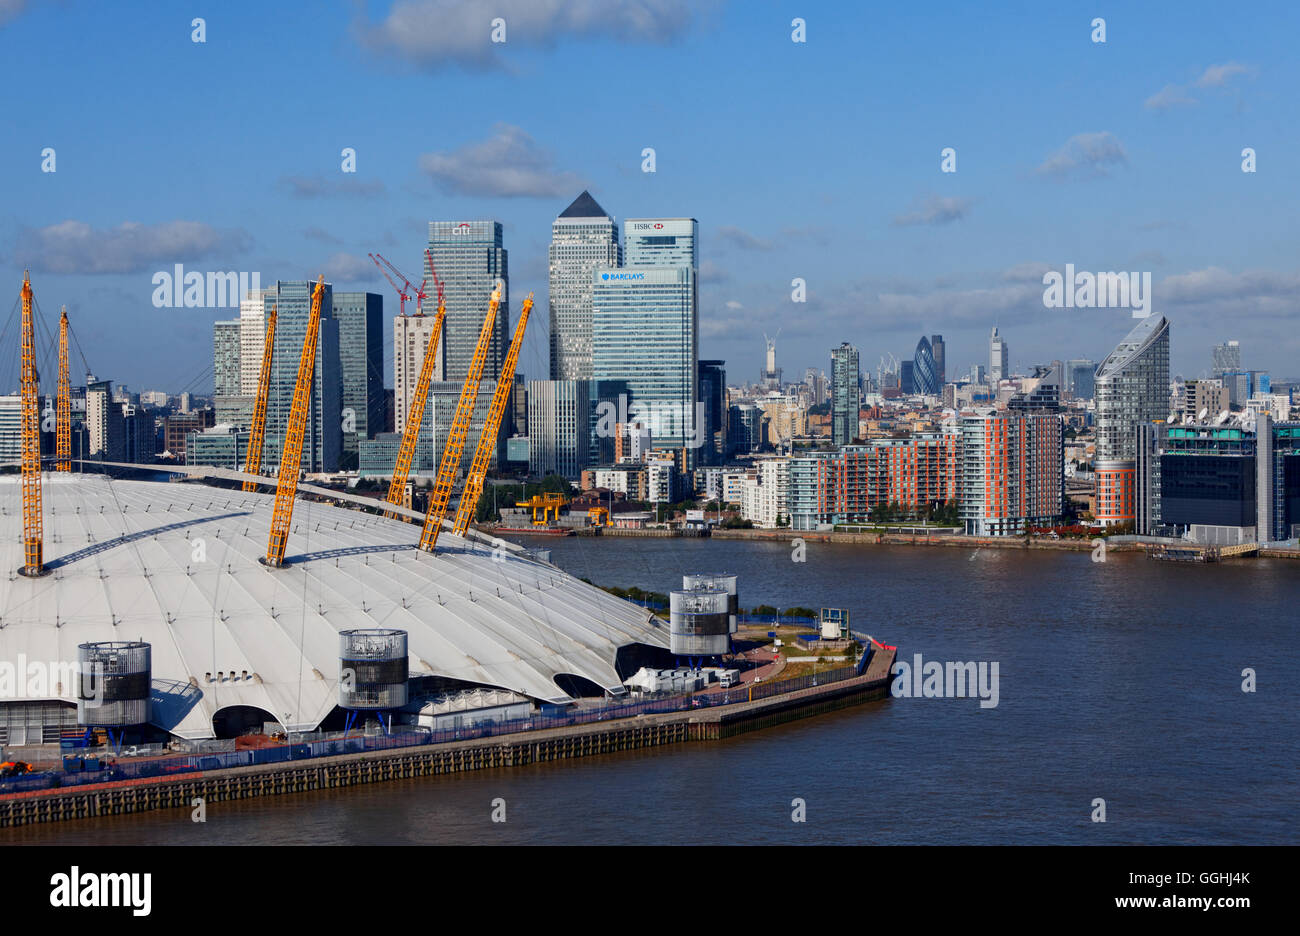 Millenium Dome and behind the skyline of the Isle of dogs and the City of London, seen from the Emirates Air Line, London, Engla Stock Photo